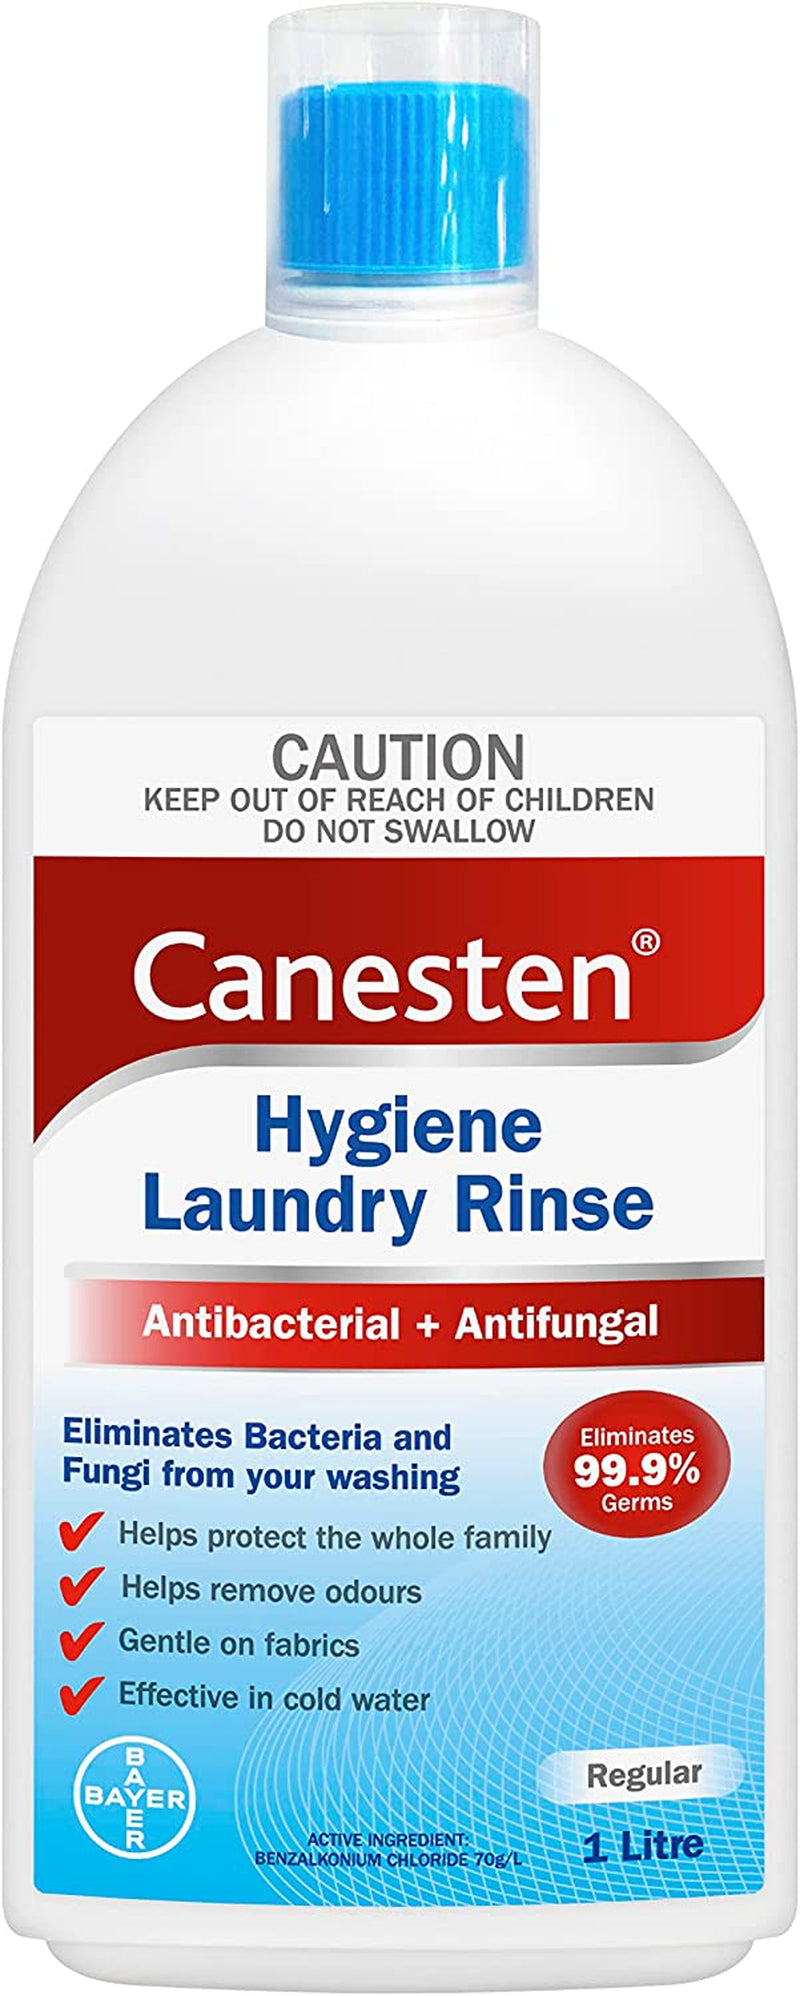 Antibacterial and Antifungal Hygiene Laundry Rinse, Eliminates Bacteria and Fungi from Your Washing, 1 Litre